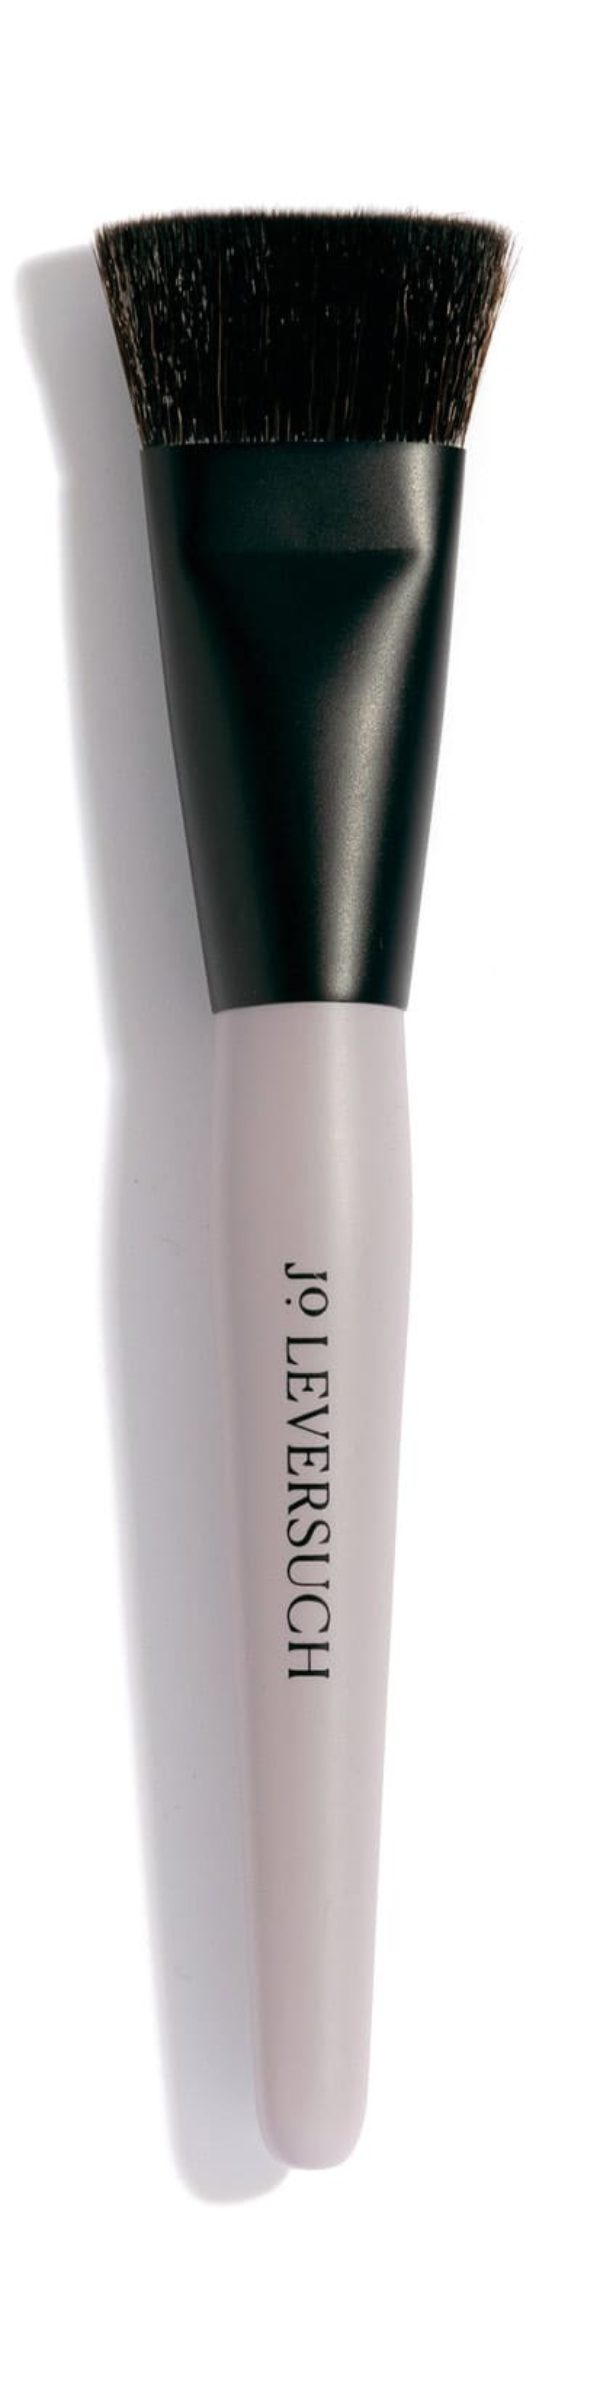 Jo Leversuch Angled Makeup Brush